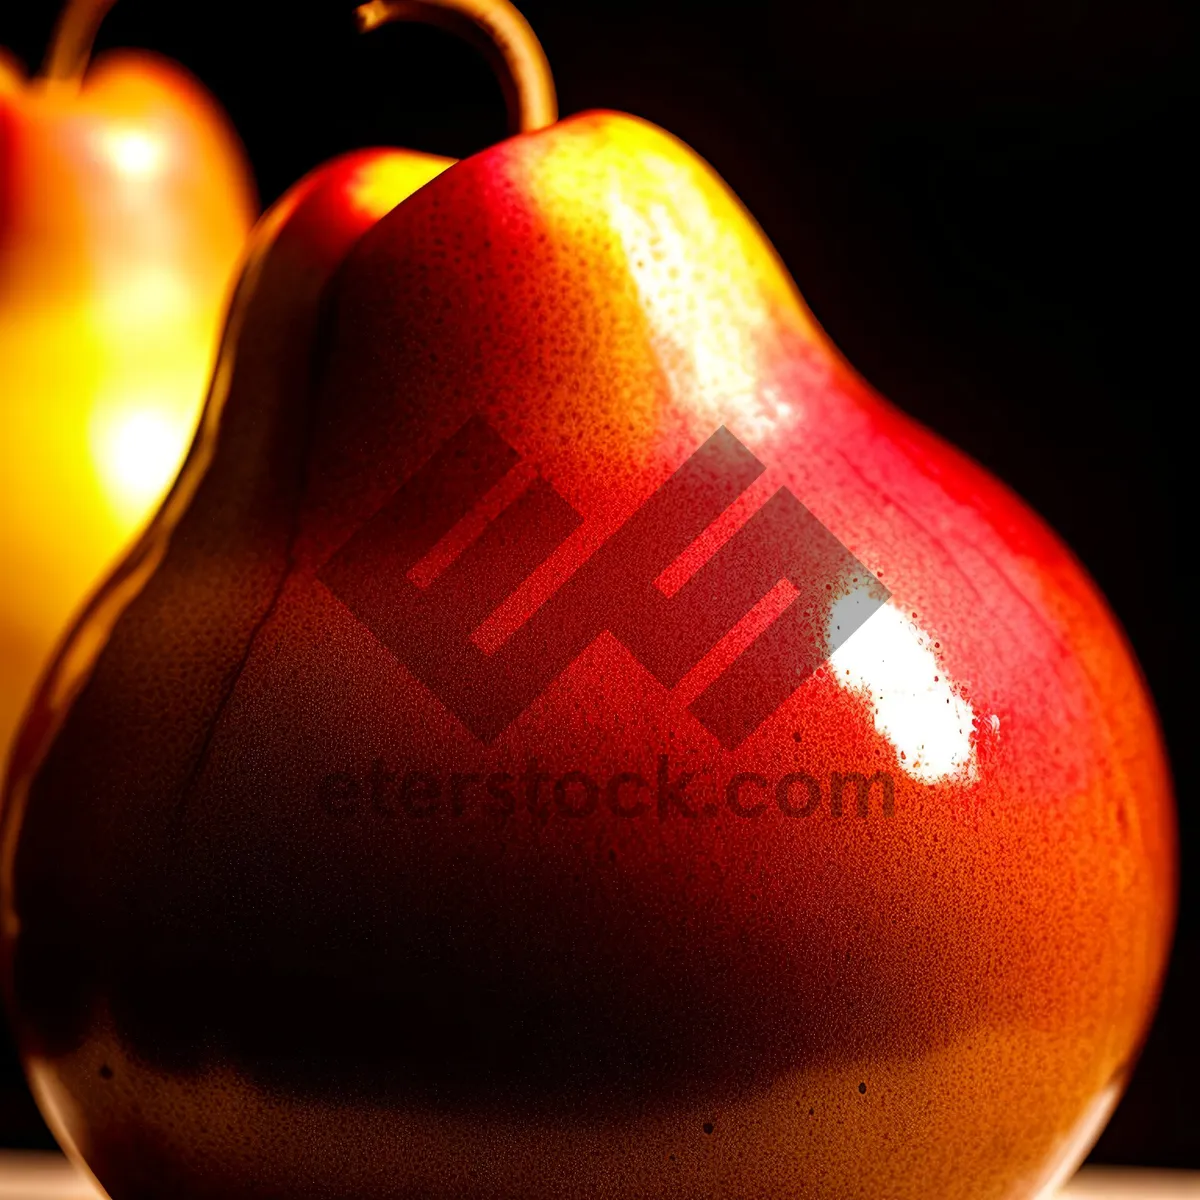 Picture of Fresh Ripe Pear - Healthy Food Decoration